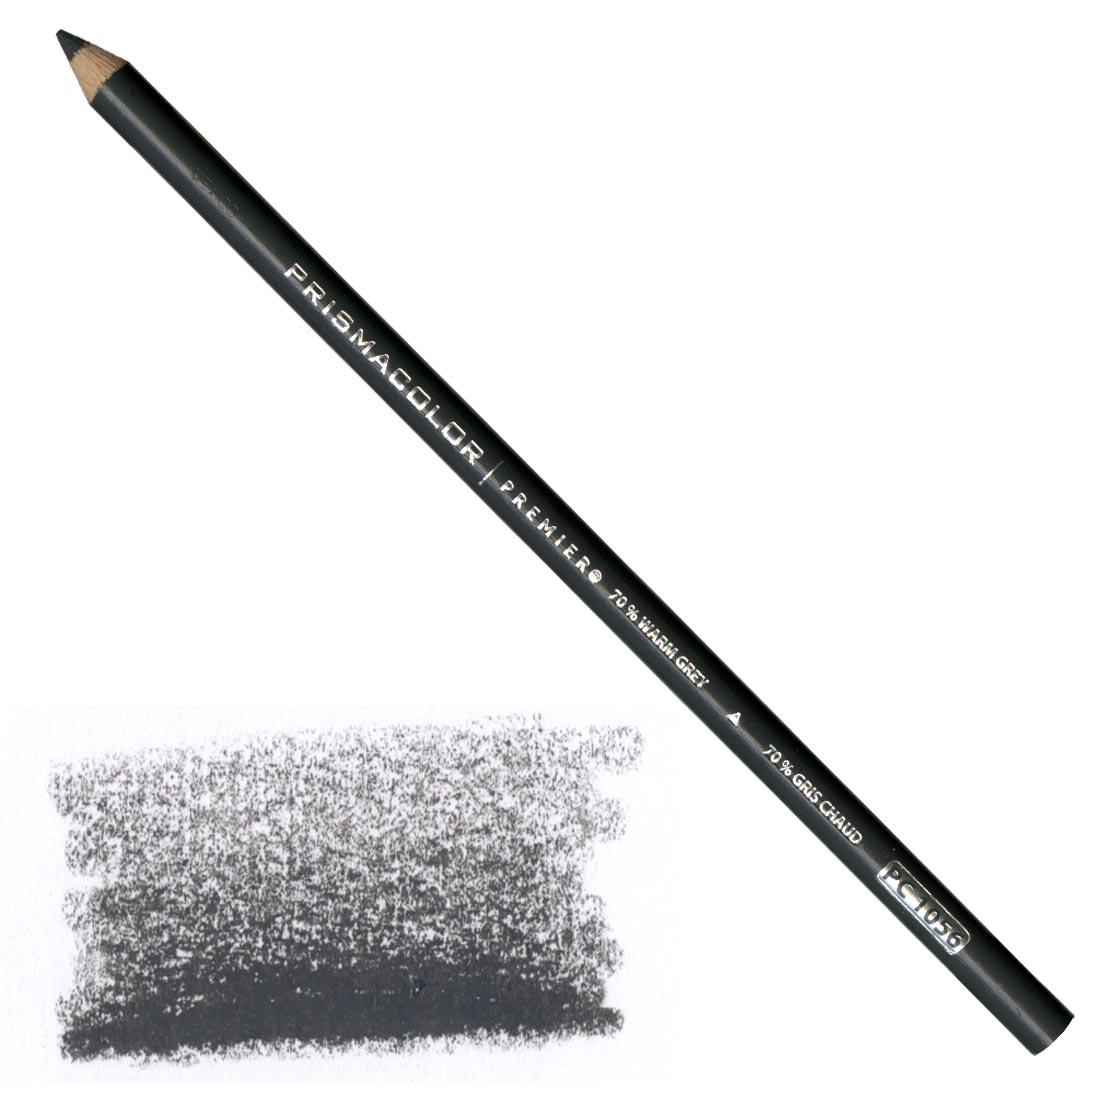 70% Warm Grey Prismacolor Premier Colored Pencil with a sample colored swatch